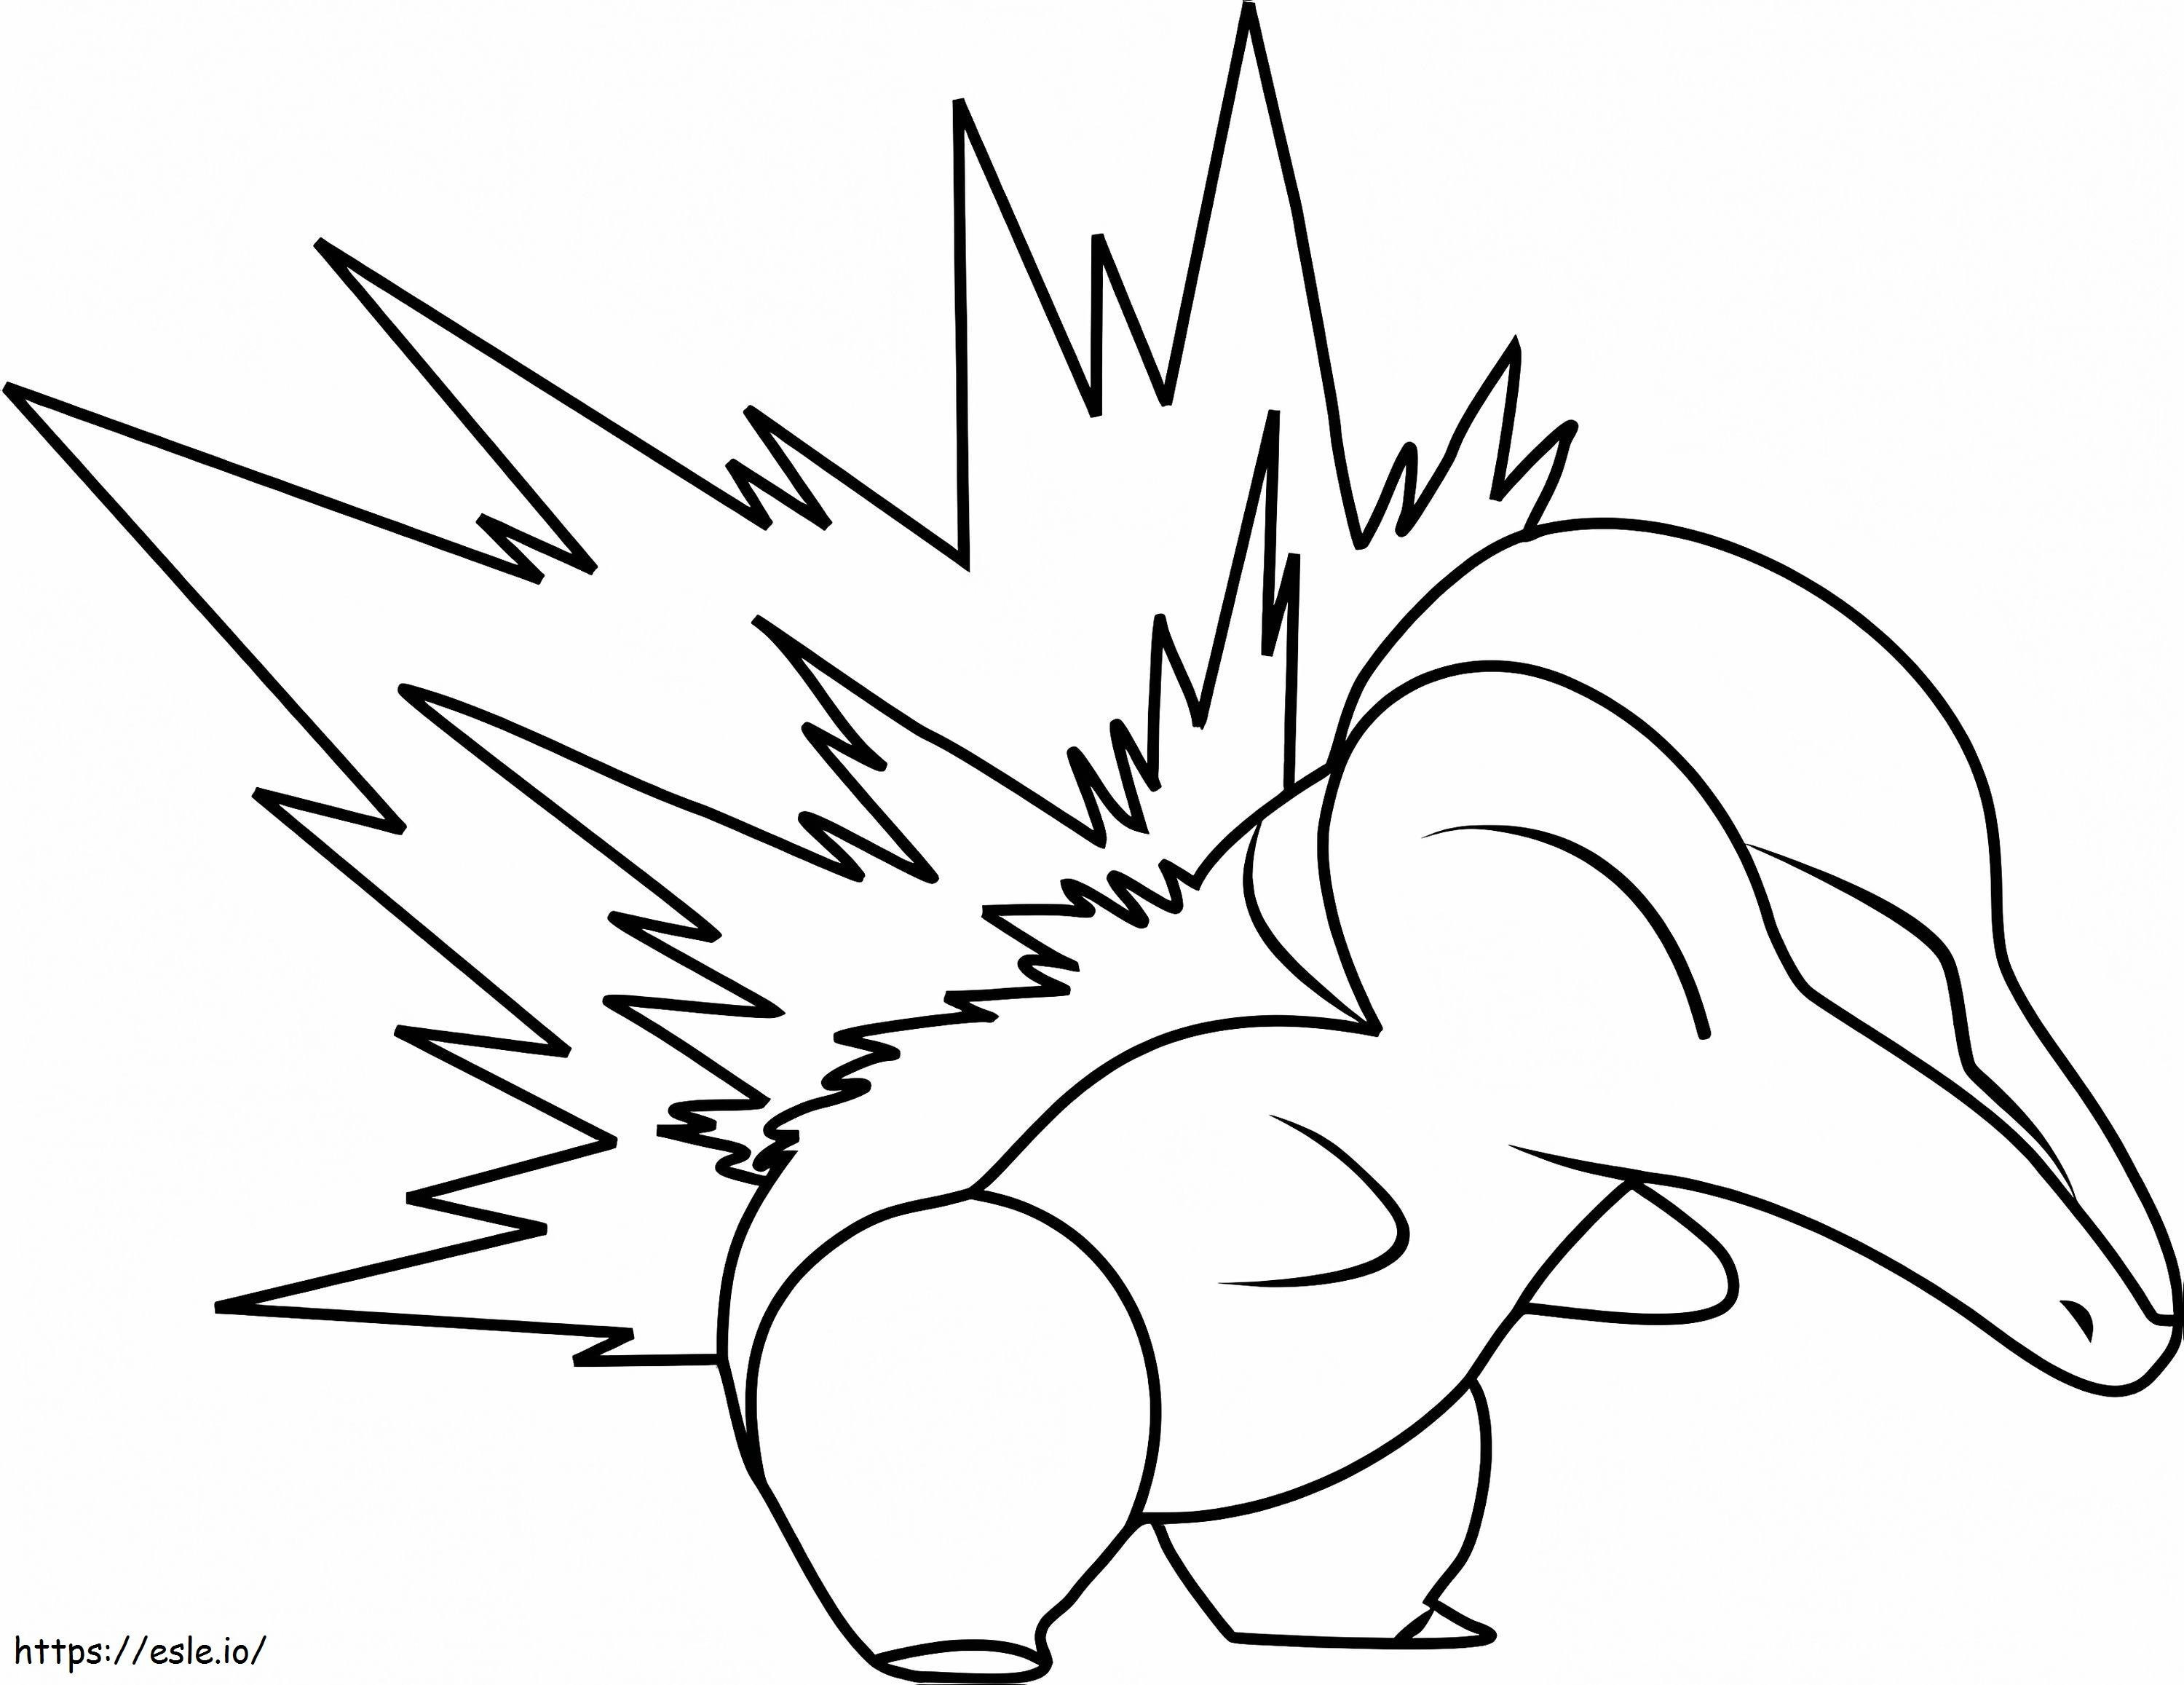 Cyndaquil 1 coloring page